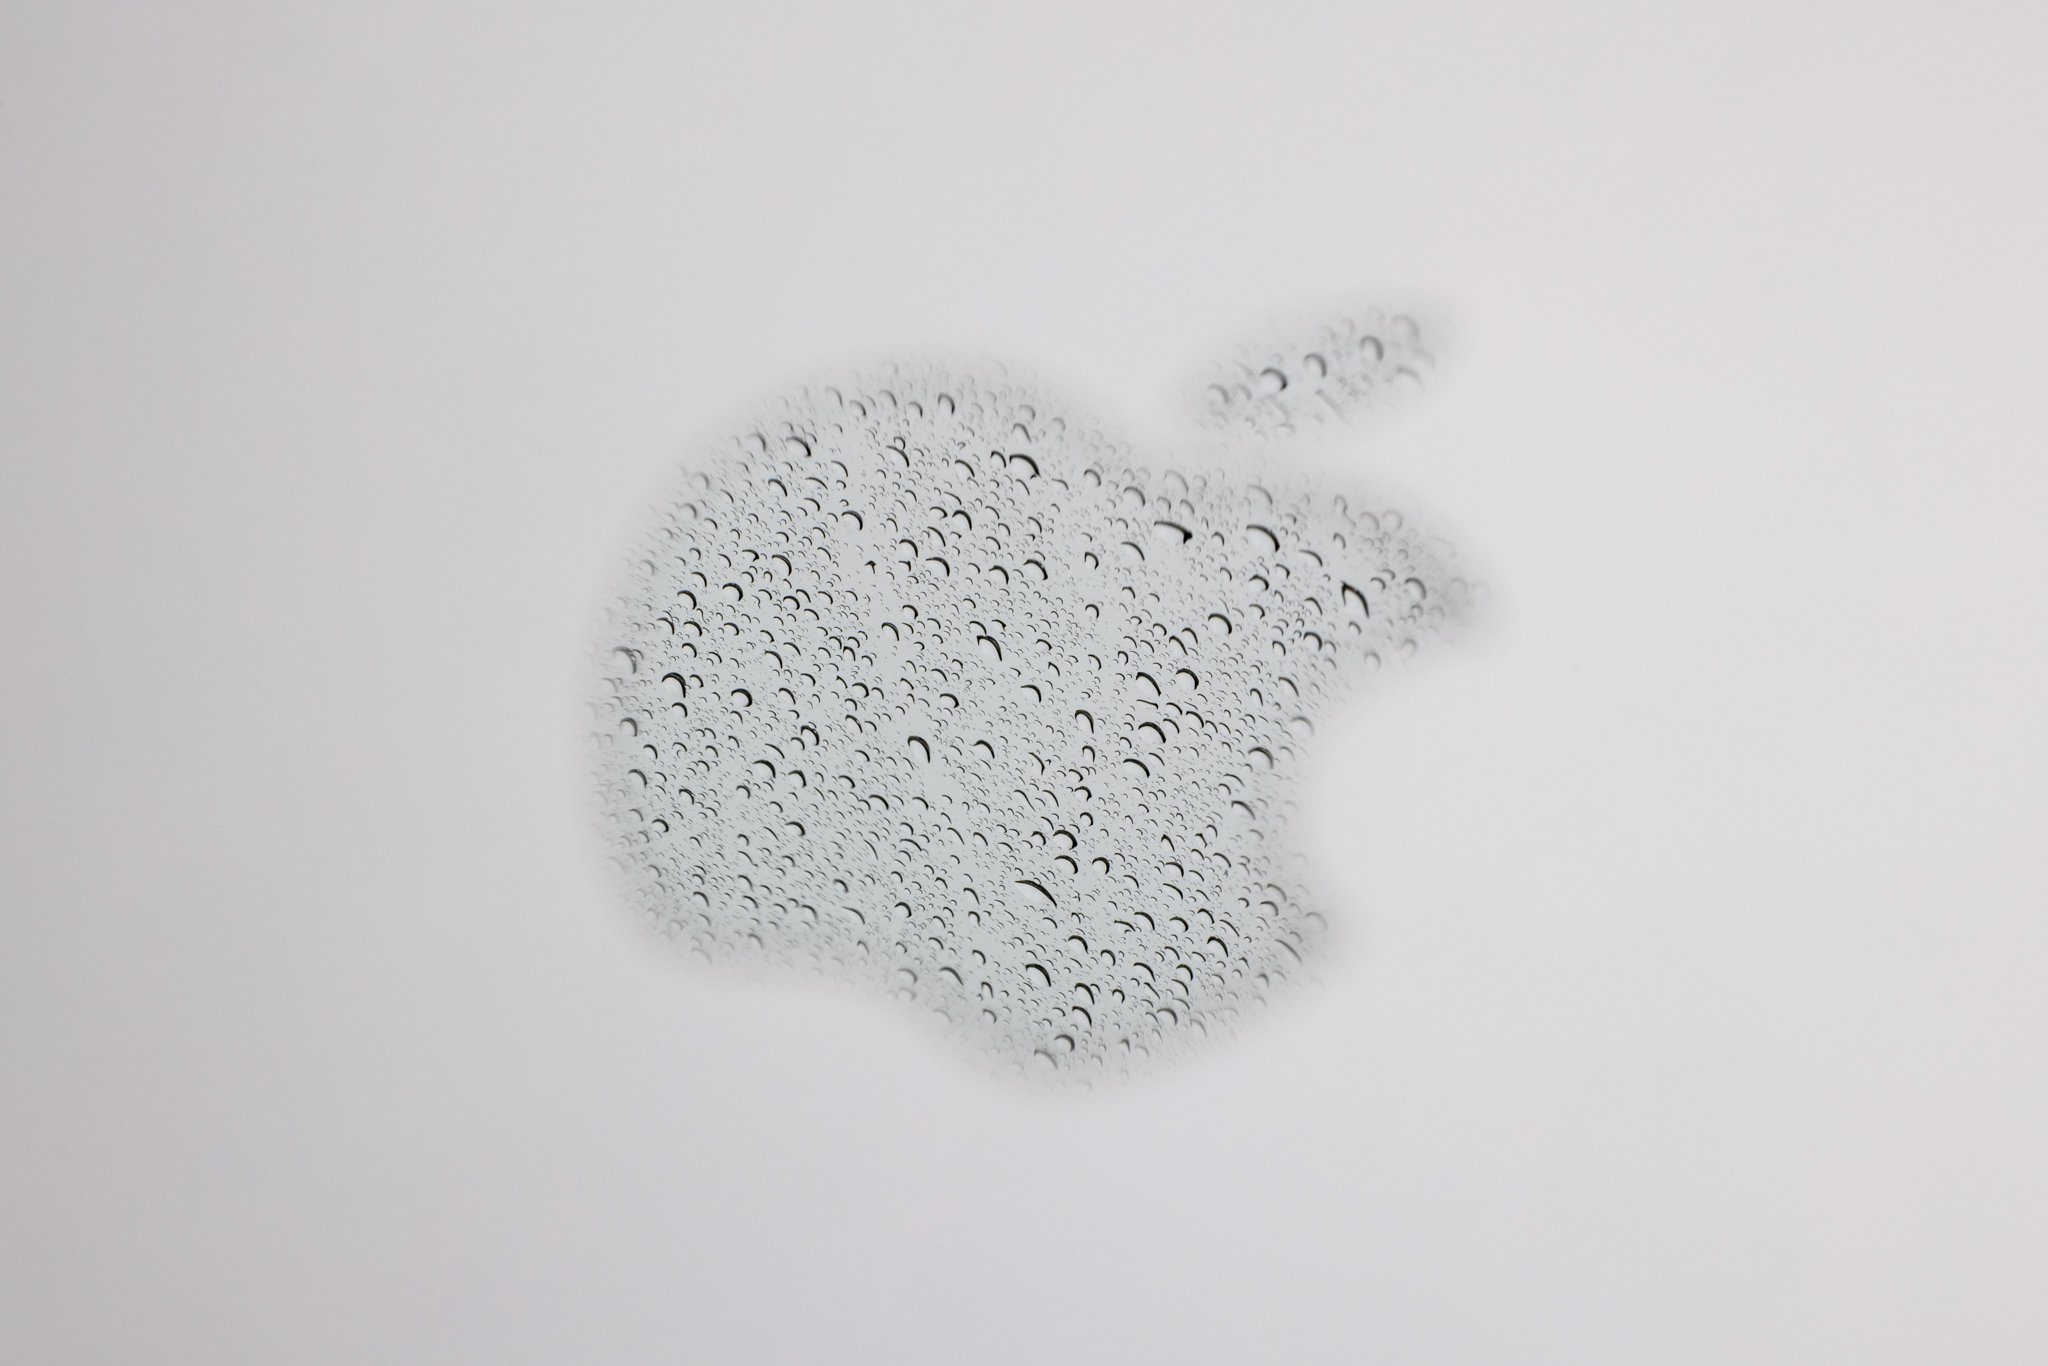 A reflection of rain in the Apple logo on a laptop photographed at f/20